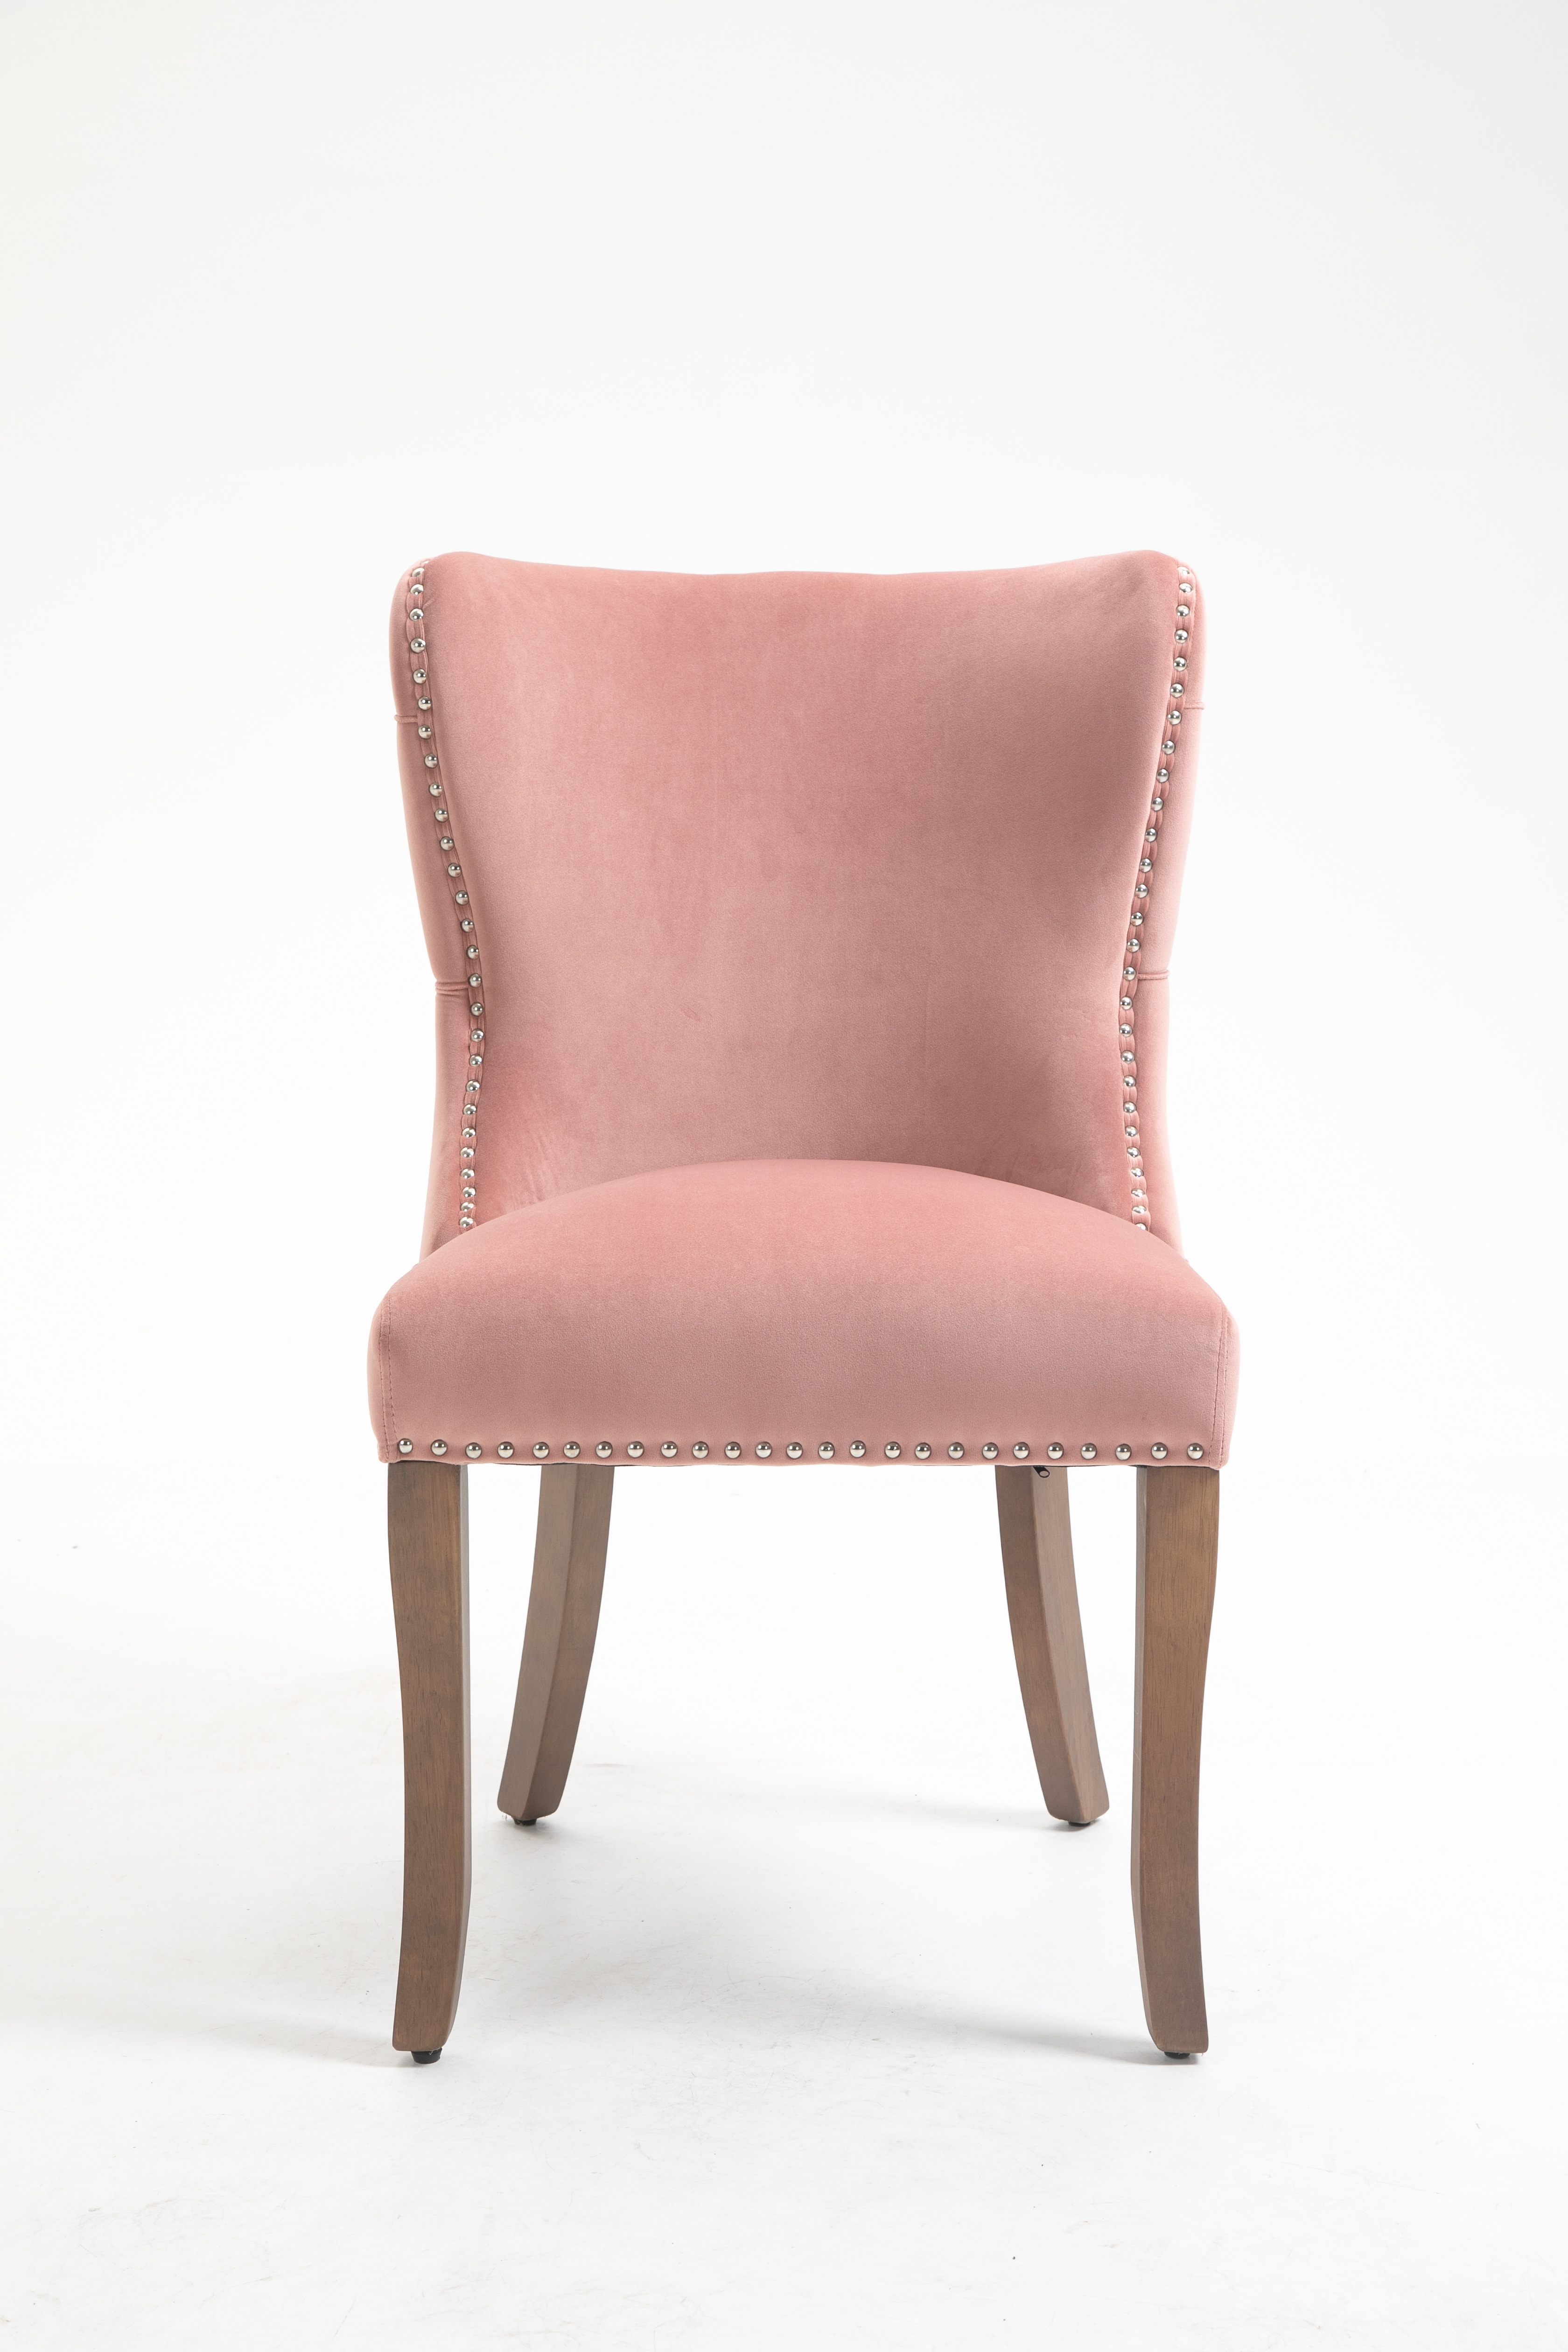 Set of 2 upholstered wing-back dining chair with backstitching nailhead trim and solid wood legs Pink-Boyel Living